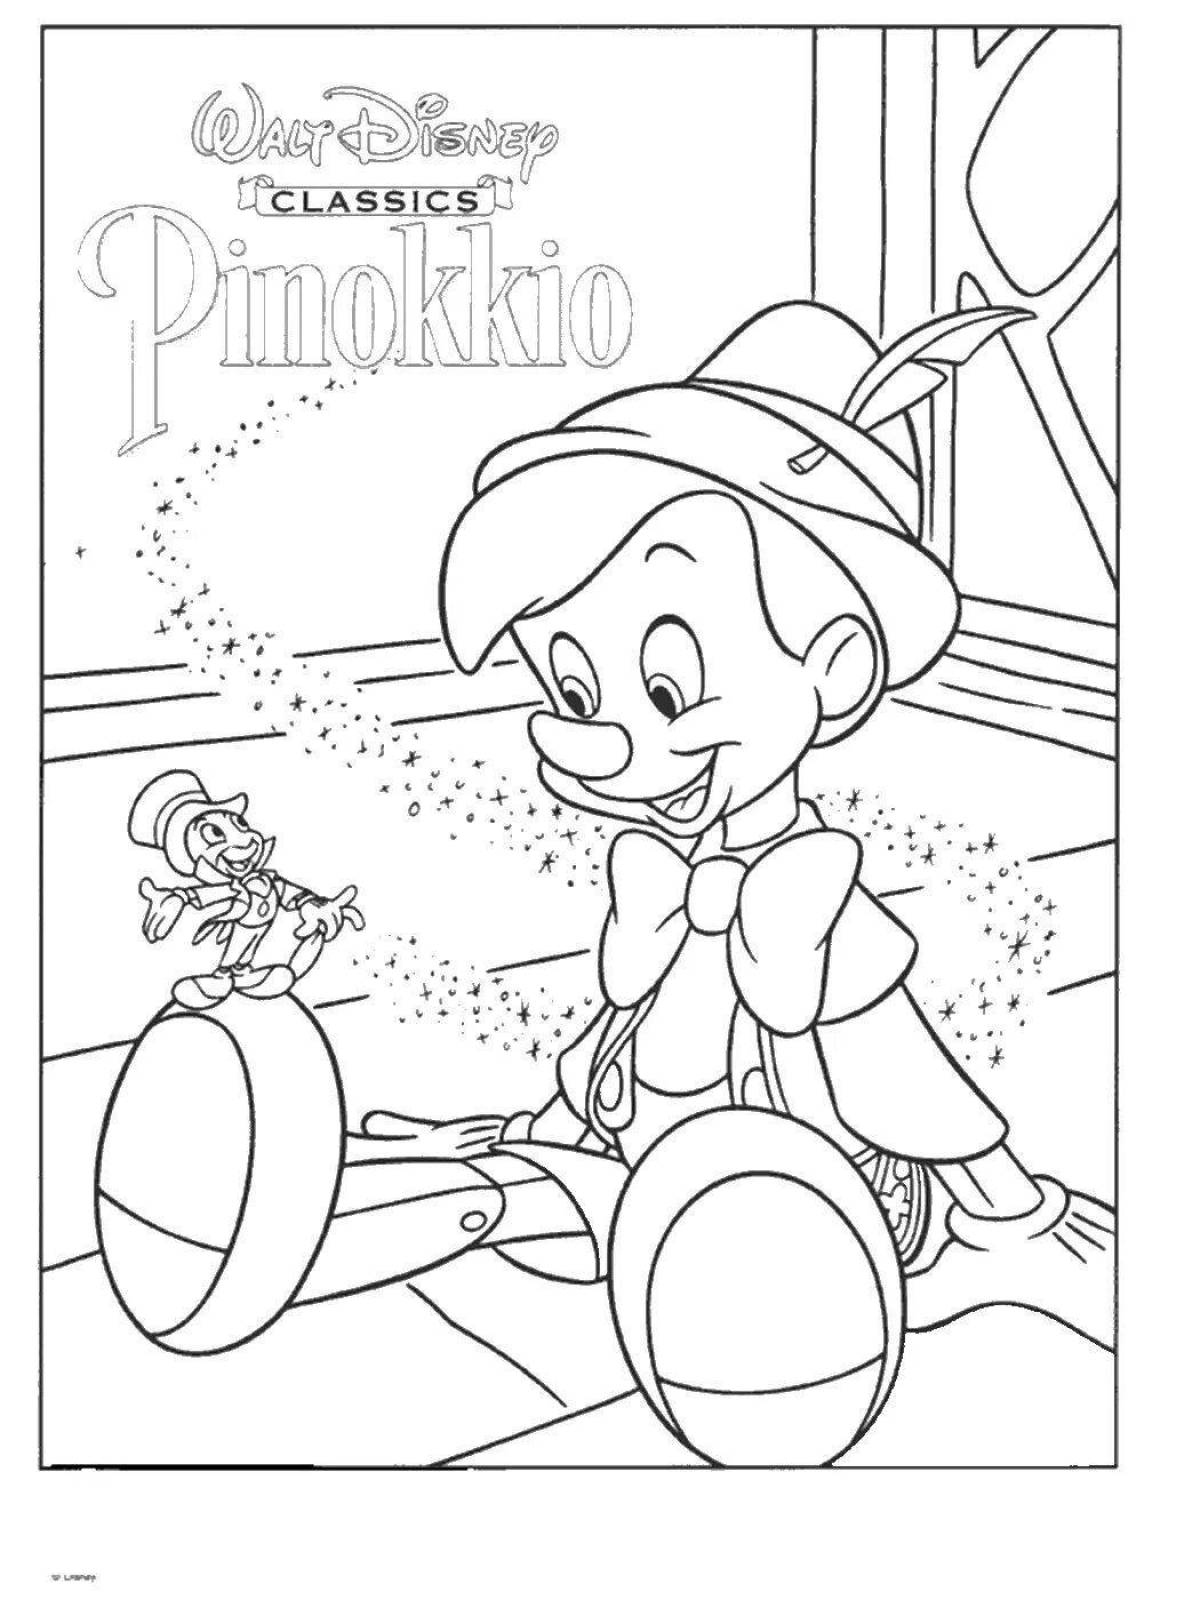 Pinocchio coloring book for kids